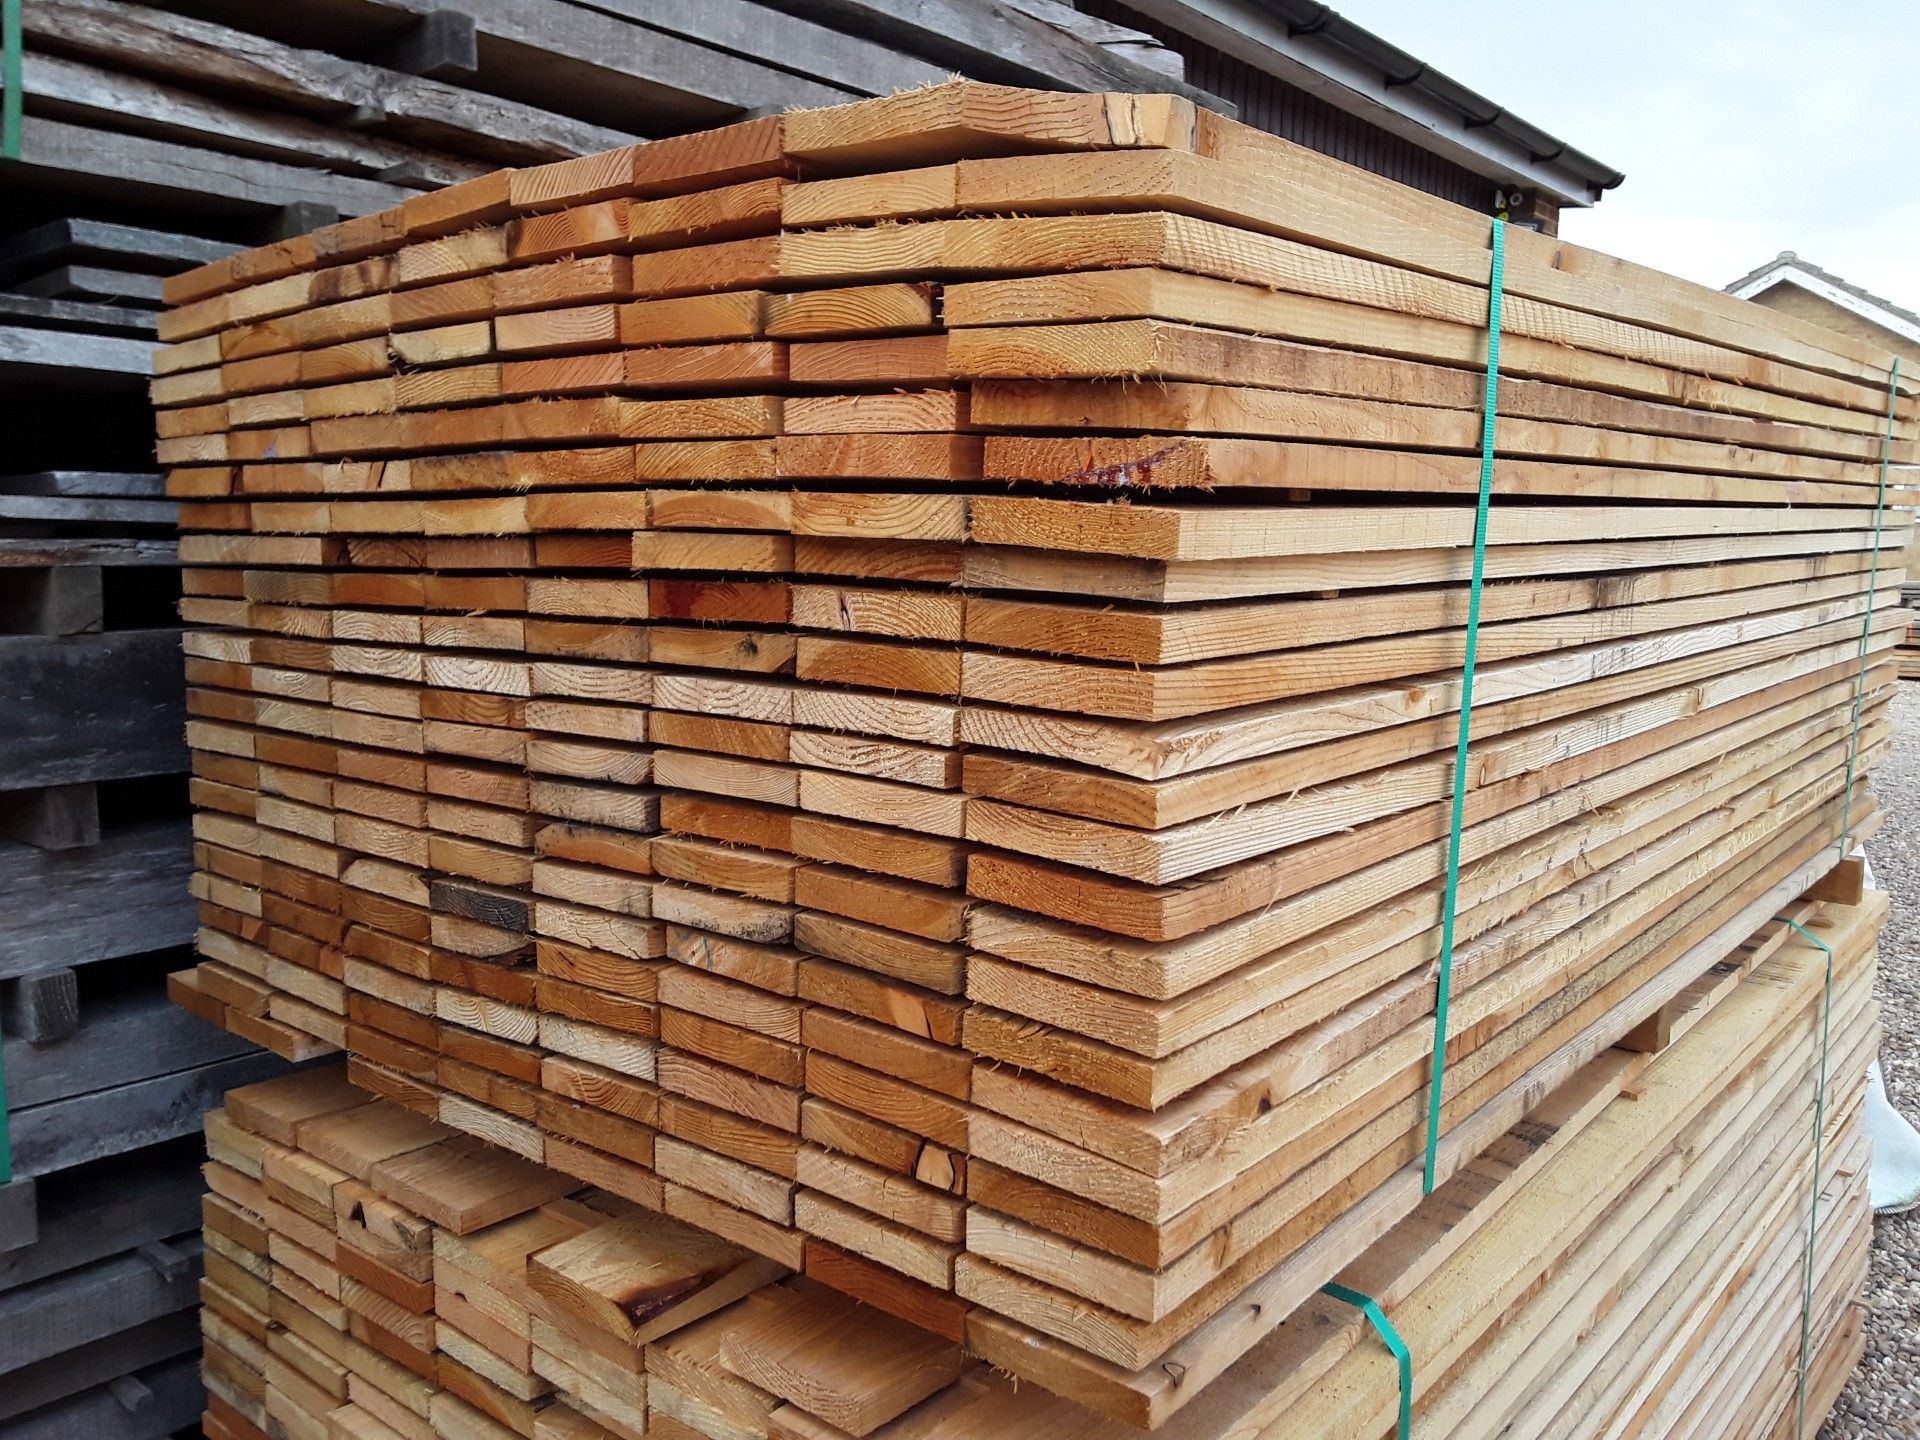 50x Softwood Sawn Timber Mixed Larch / Douglas Fir Boards - Image 5 of 6